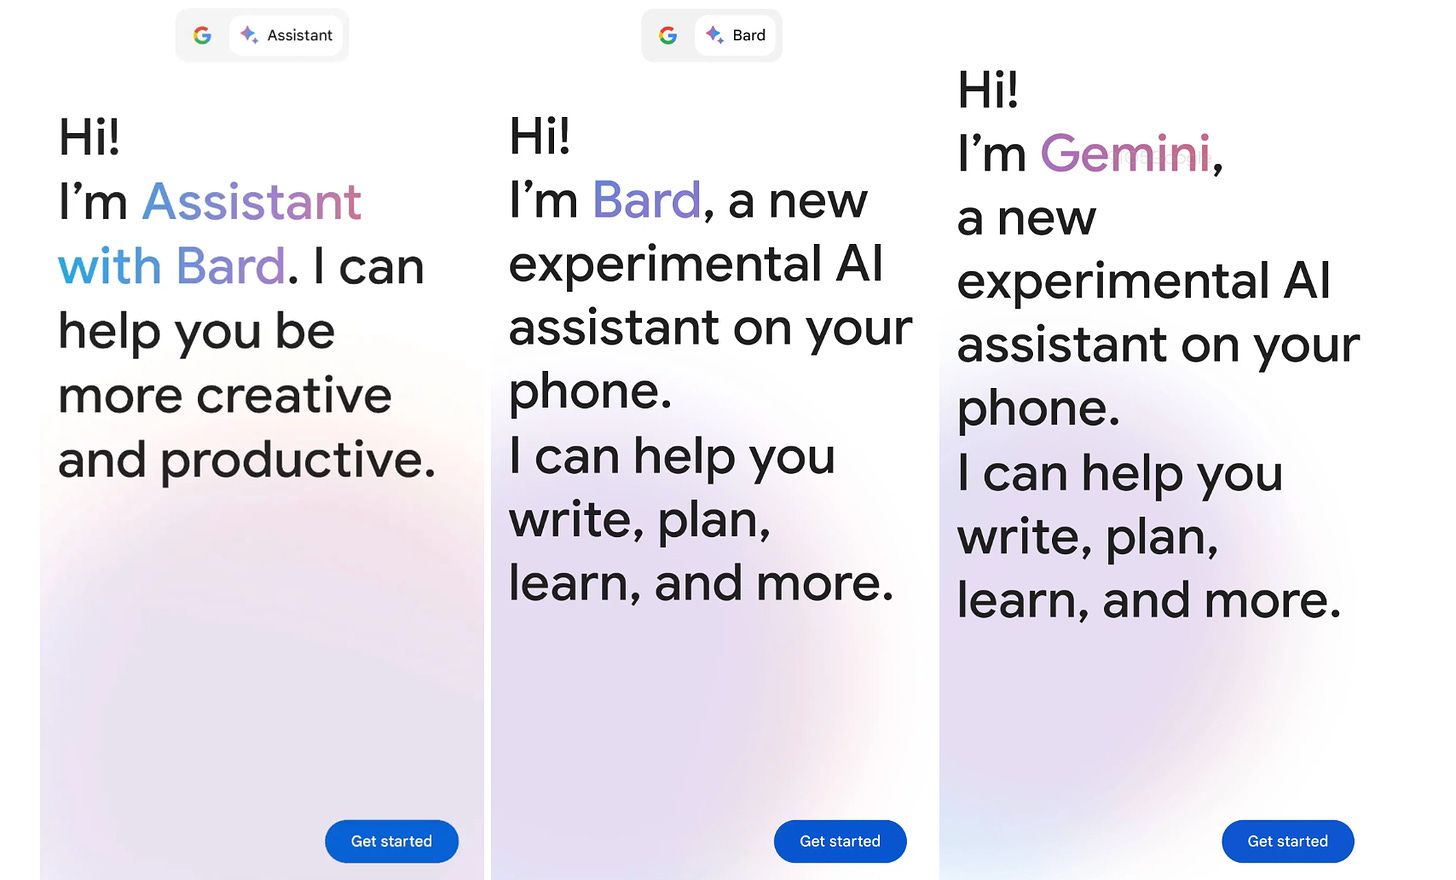 Assistant to Bard to Gemini Via: 9to5 Google